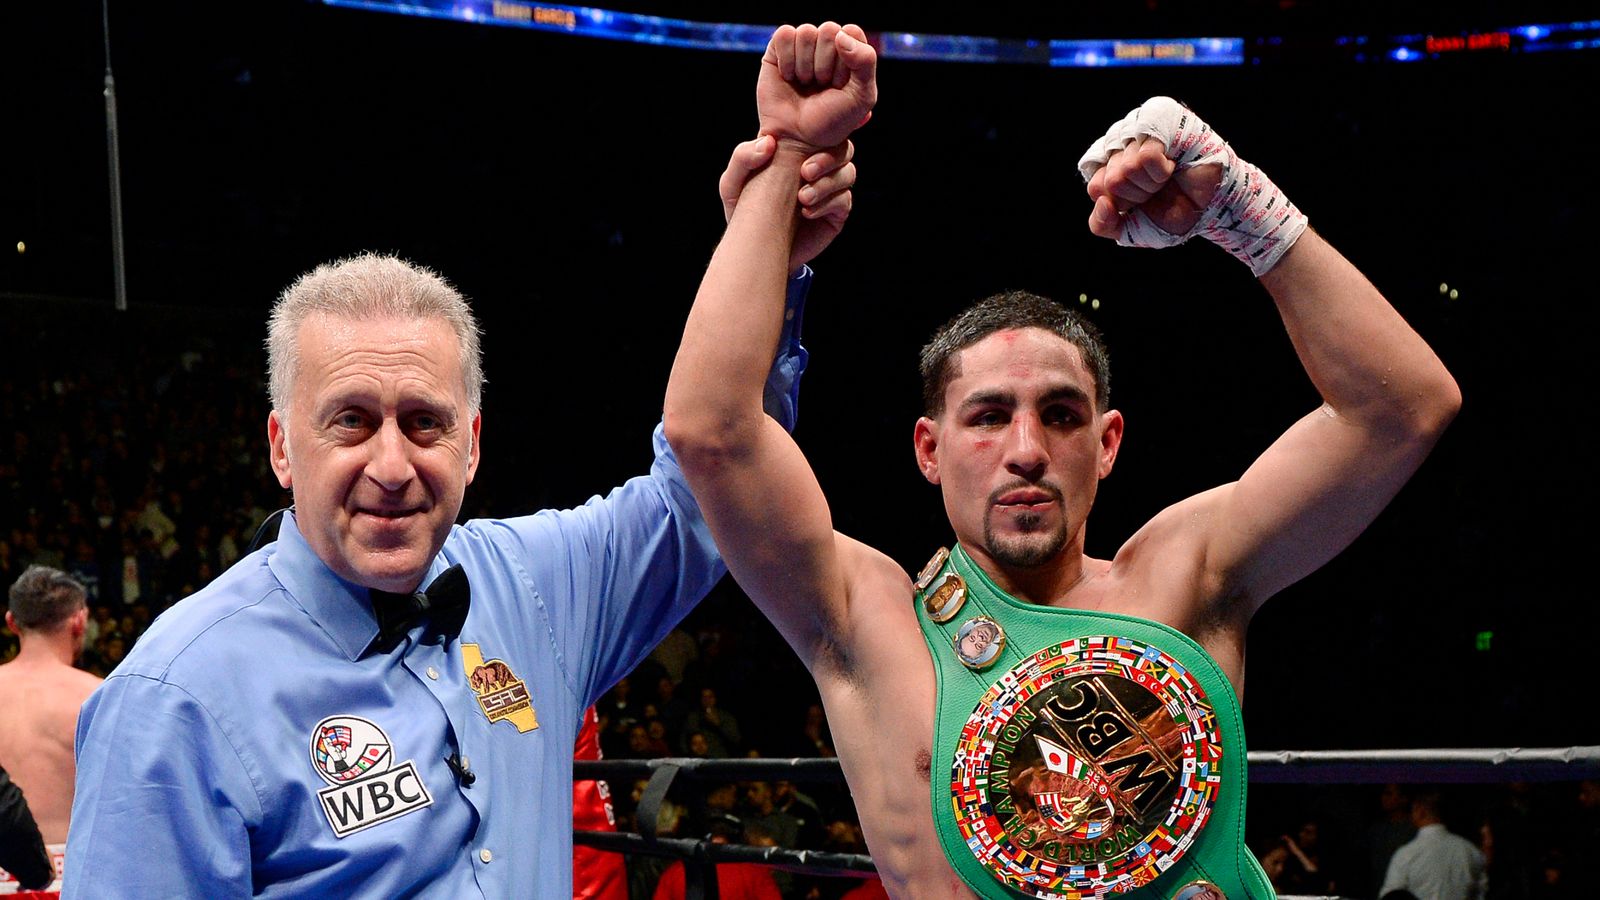 Danny Garcia sets up possible rematch with Amir Khan after WBC win | Boxing News | Sky ...1600 x 900